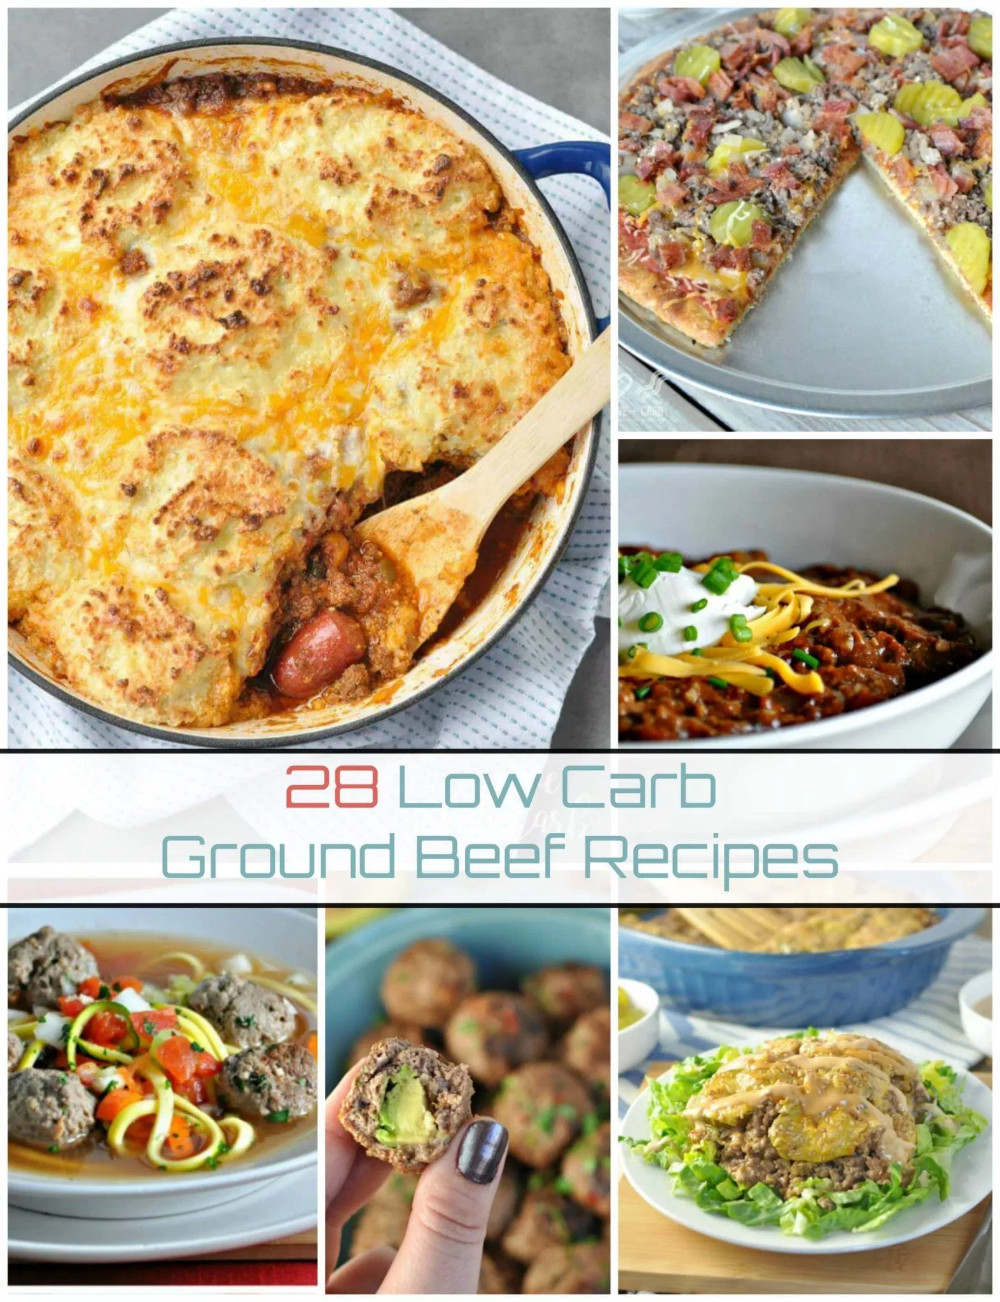 Gourmet Ground Beef Recipes
 28 Low Carb Ground Beef Recipes